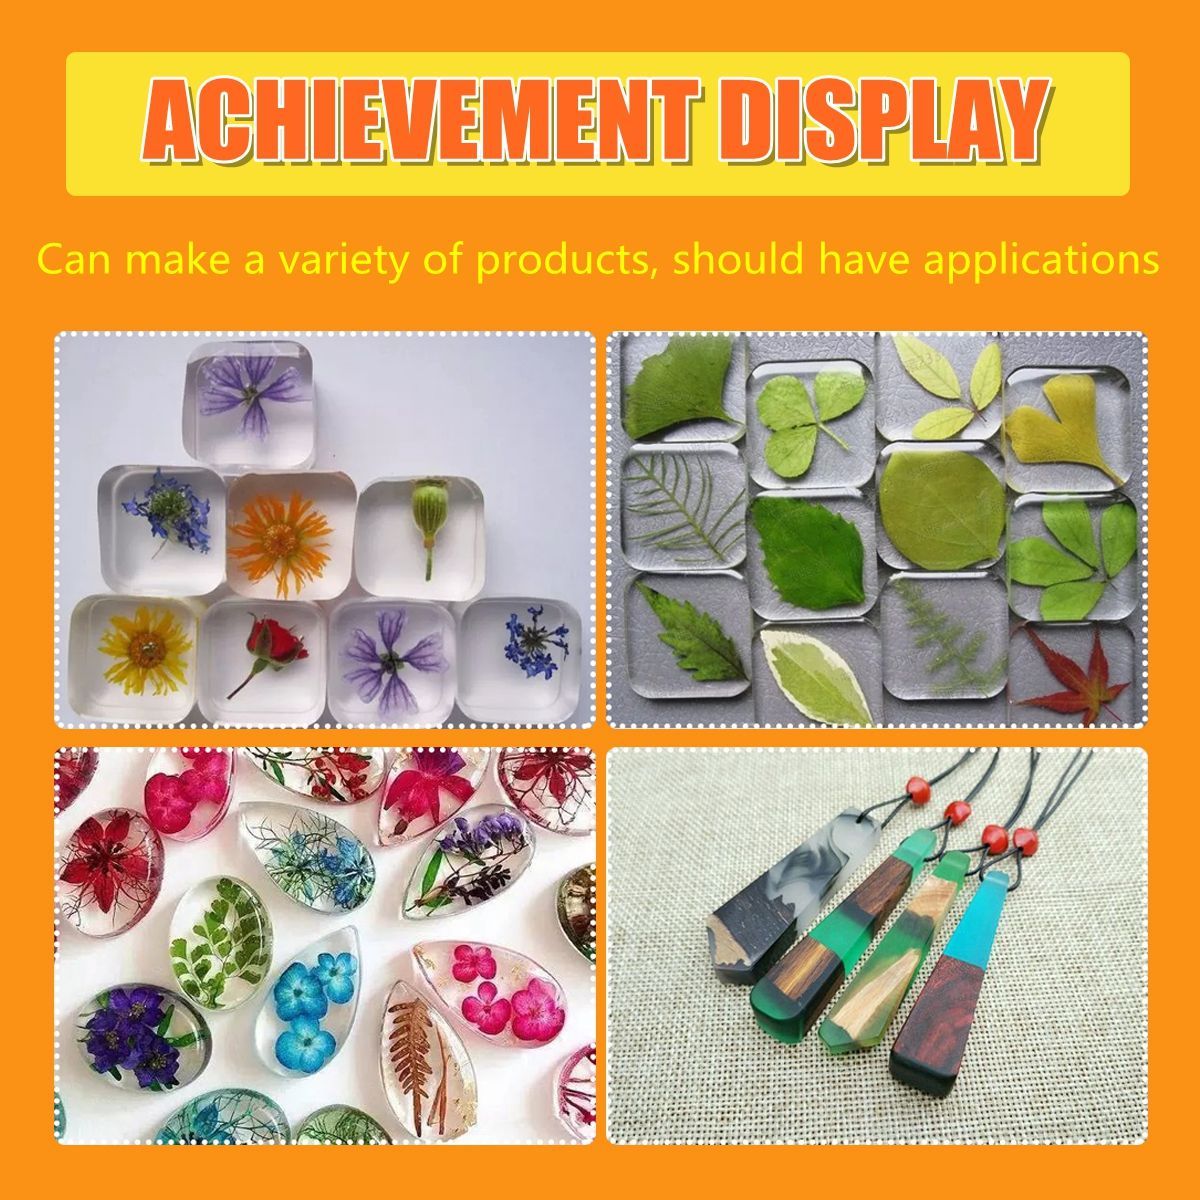 18pcs-Jewelry-Mould-Handmade-Crystal-Glue-Mould-Set-Resin-Silicone-DIY-Mold-Kit-1739573